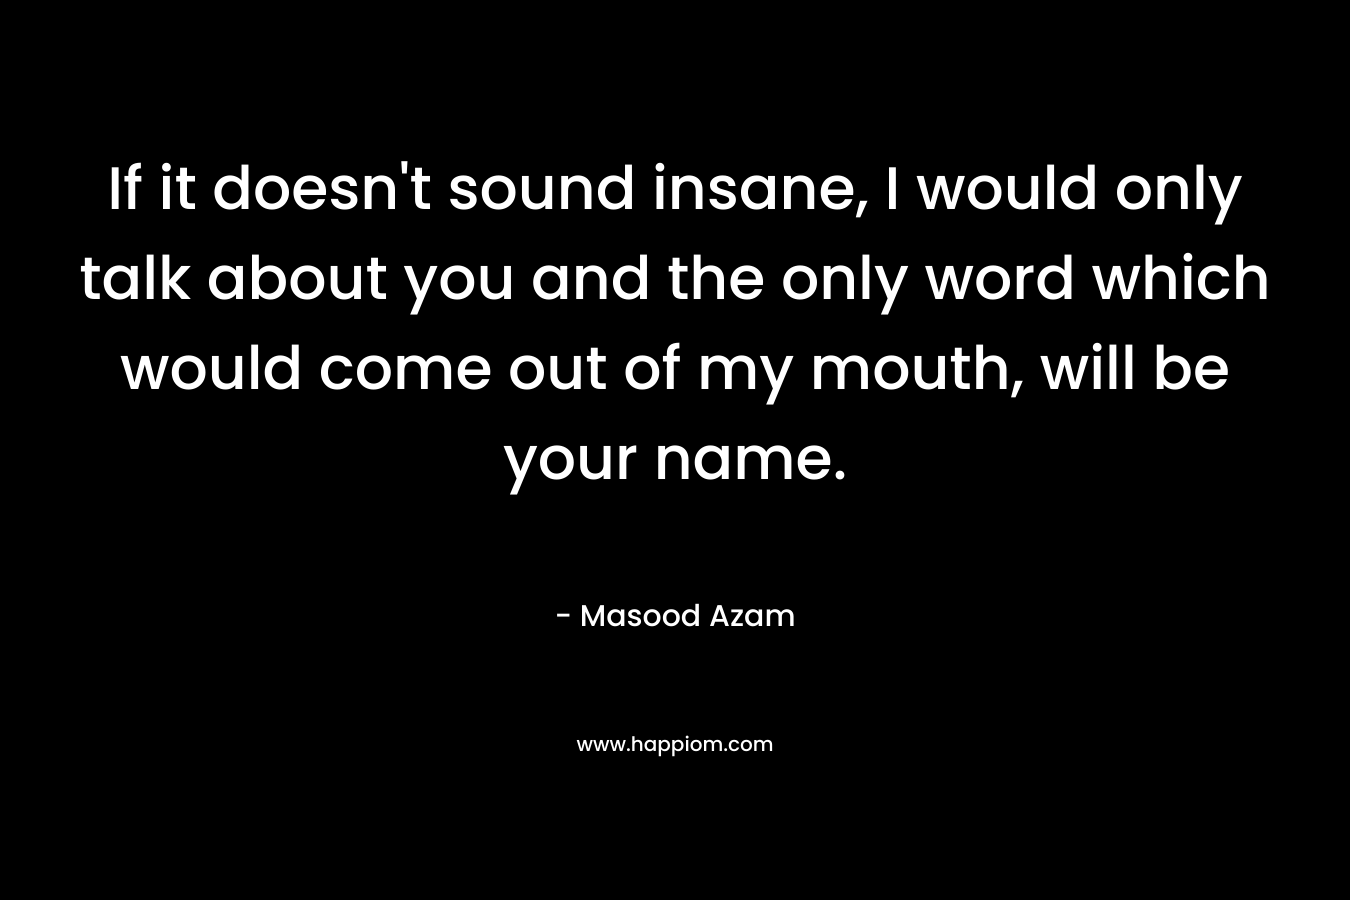 If it doesn't sound insane, I would only talk about you and the only word which would come out of my mouth, will be your name.